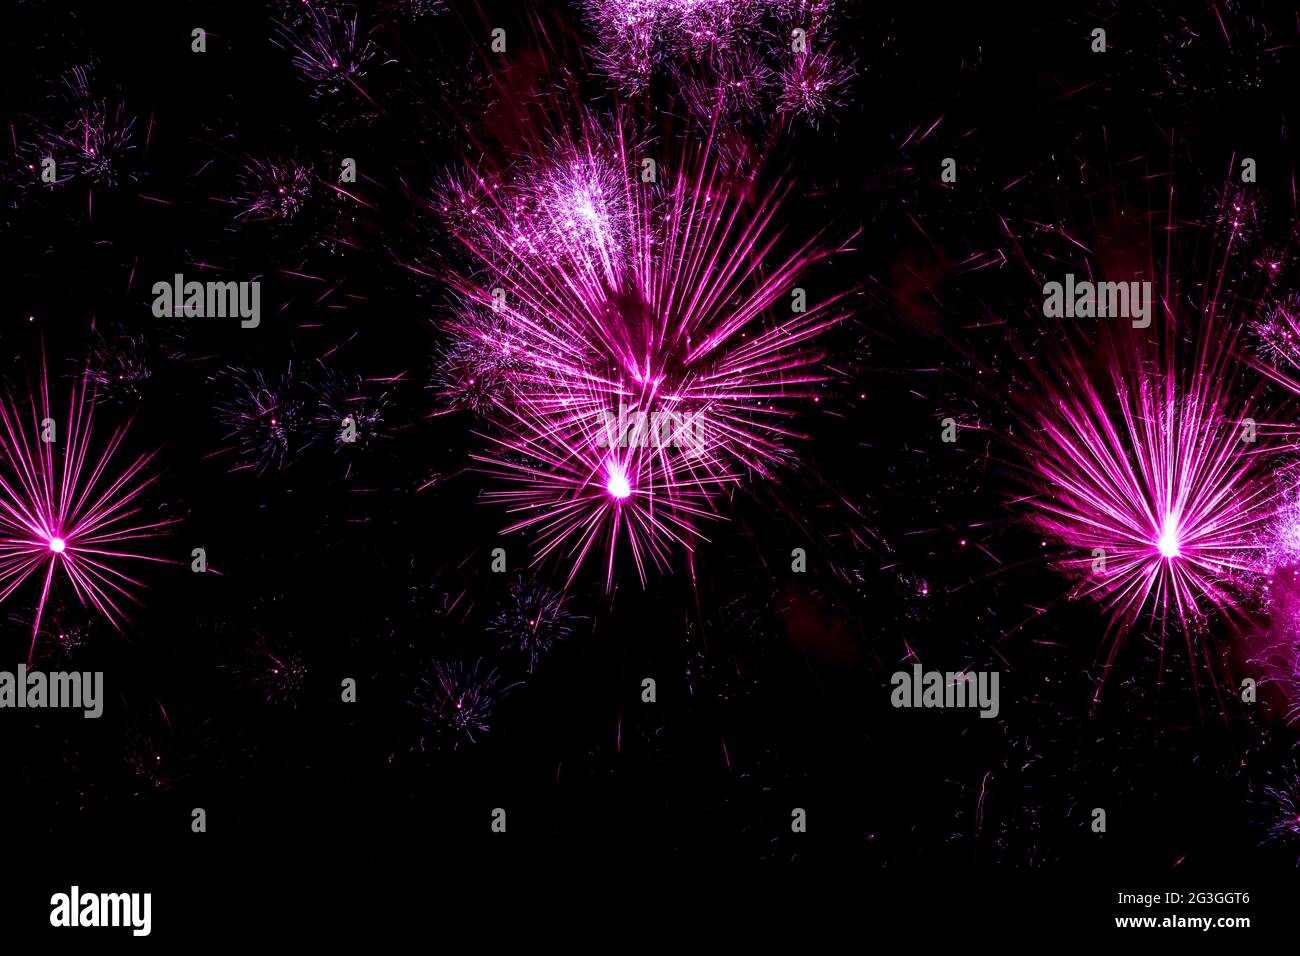 Pink fireworks in a black night sky Stock Photo